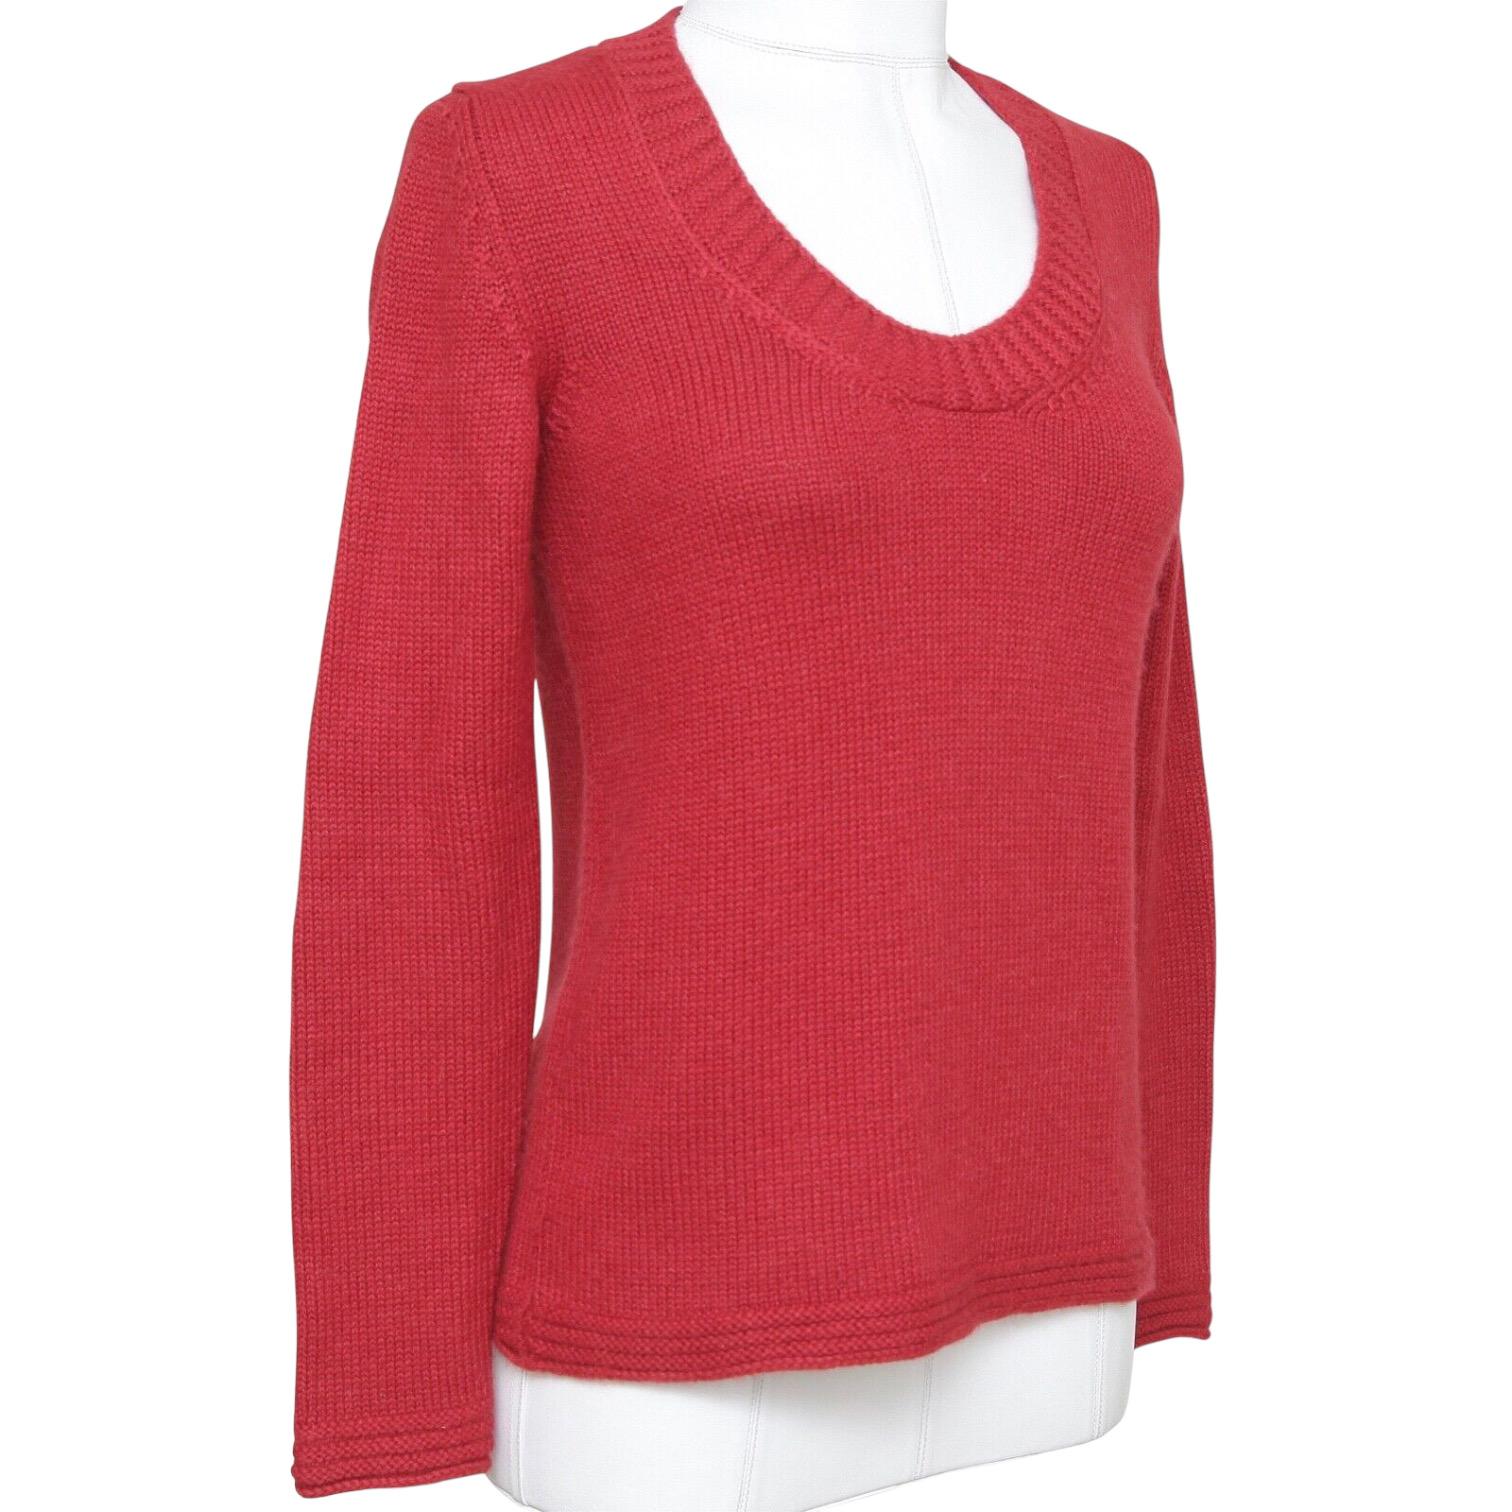 GUARANTEED AUTHENTIC CHLOE RED ALPACA SCOOP KNIT SWEATER

Details:
- Pullover scoop neck sweater in a fresh red color.
- Long sleeve.
- Ribbing at neckline, sleeves and hem.
- Easy great piece for your Chloe collection.

Size: XS

Fabric: 100%